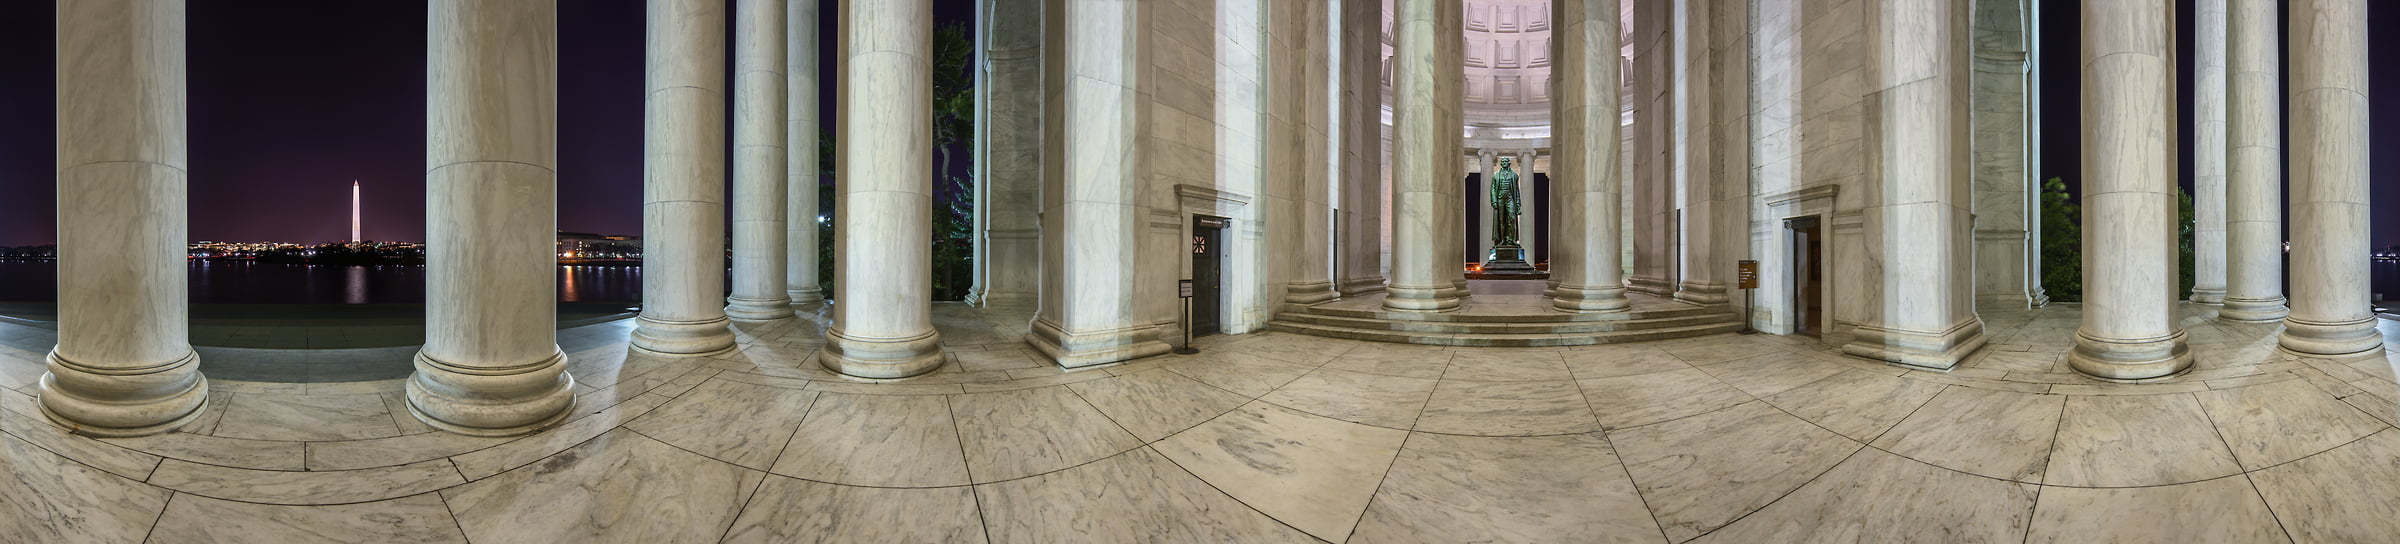 226 megapixels! A very high resolution, 360-degree VAST photo of the Jefferson Memorial at night; panorama photograph created by Tim Lo Monaco in Washington, D.C, USA.